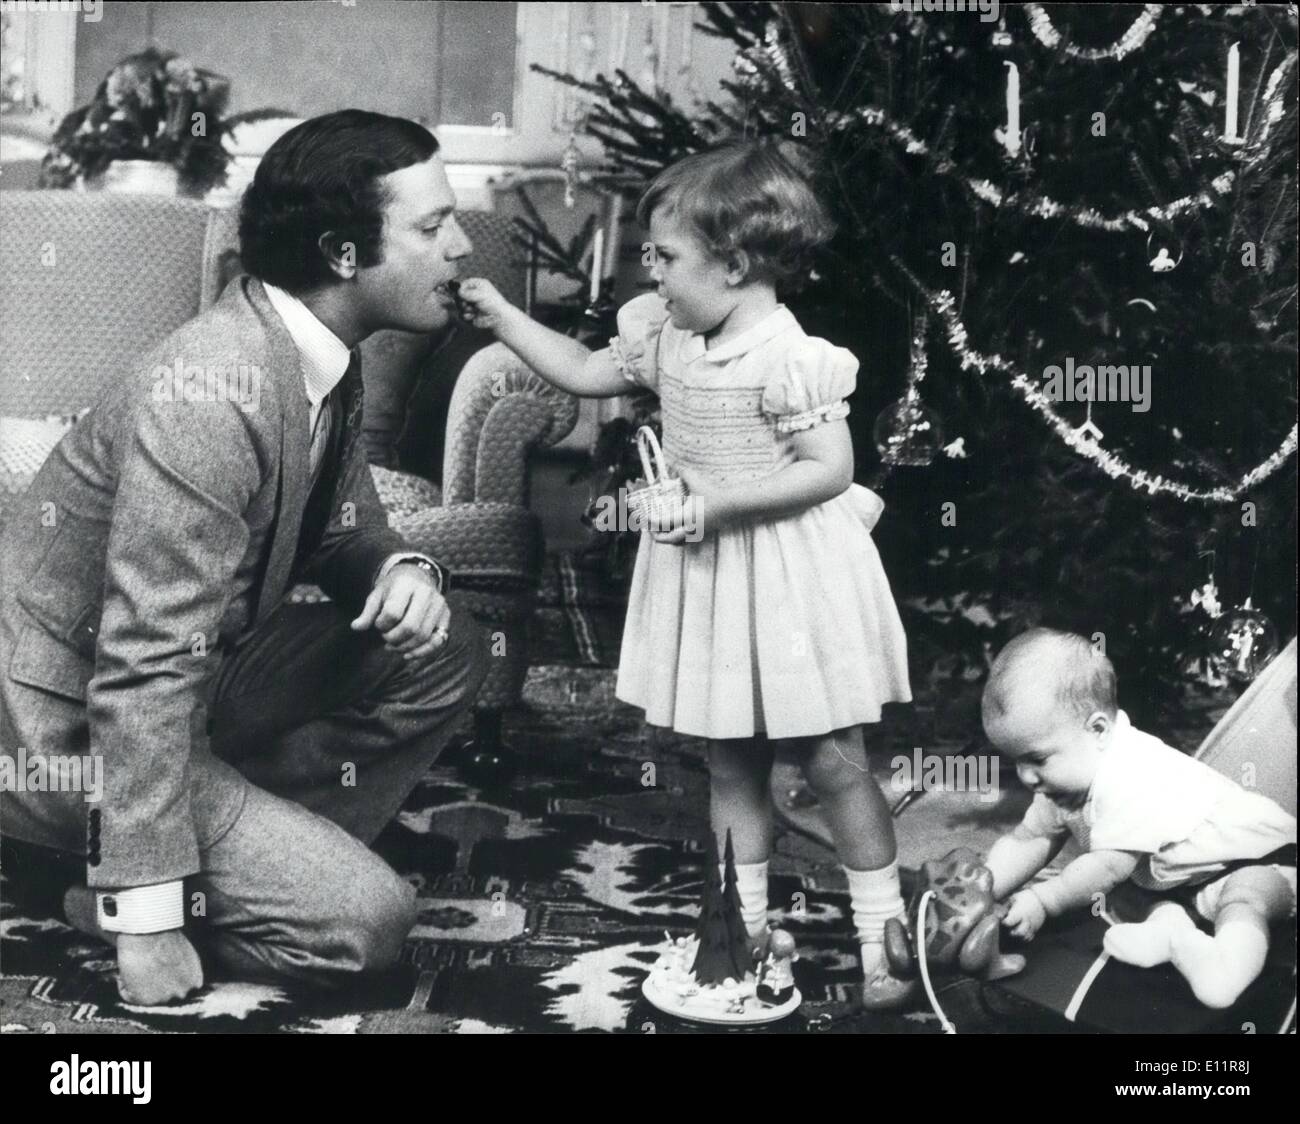 Dec. 12, 1979 - Crown Prince until Christmas: Prince Carl Philips's first Christmas. He will be heir to the throne until the end of the year when a change in the constitution will make his elder sister, Princess Victoria aged 2 1/2 year old heir. Photo shows Princess Victoria aged 2 1/2, gives her father King Carl Gustof a sweet, while her brother Prince Carl Philip plays with a toy, during the dressing the Christmas tree at Stenhammar Castle. Stock Photo